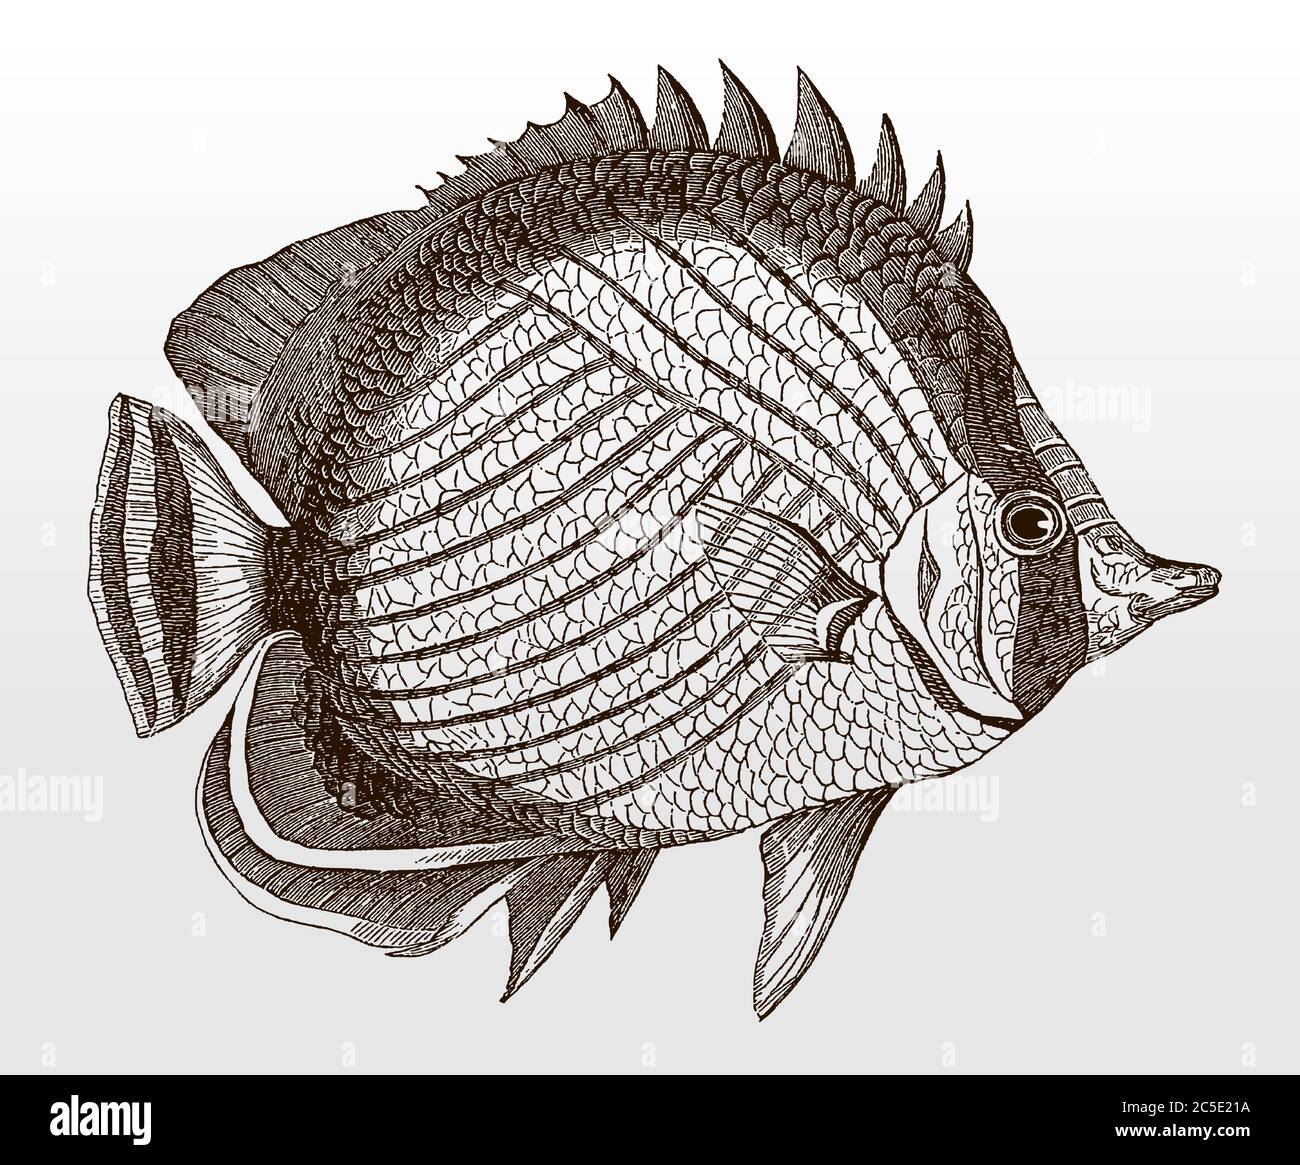 Vagabond butterflyfish, chaetodon vagabundus, an Indo-Pacific marine fish in side view after an antique illustration from the 19th century Stock Vector